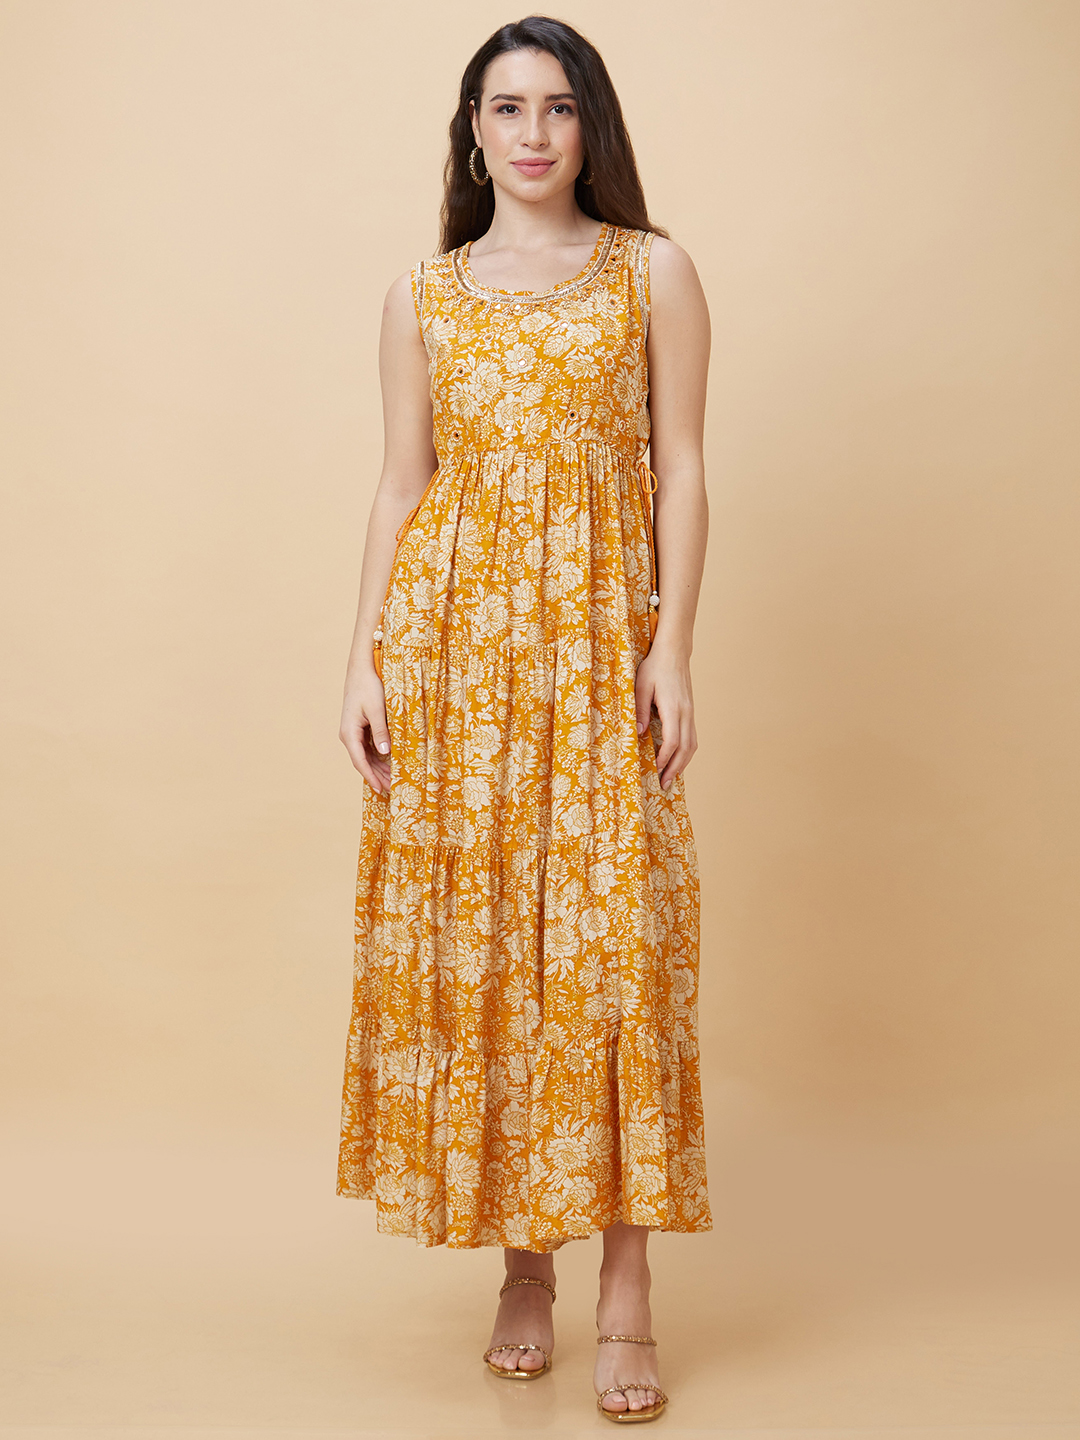 Globus Women Mustard Floral Print Round Neck Sleeveless Casual Maxi A-Line Tiered Dress with Dori And Tassel Detail